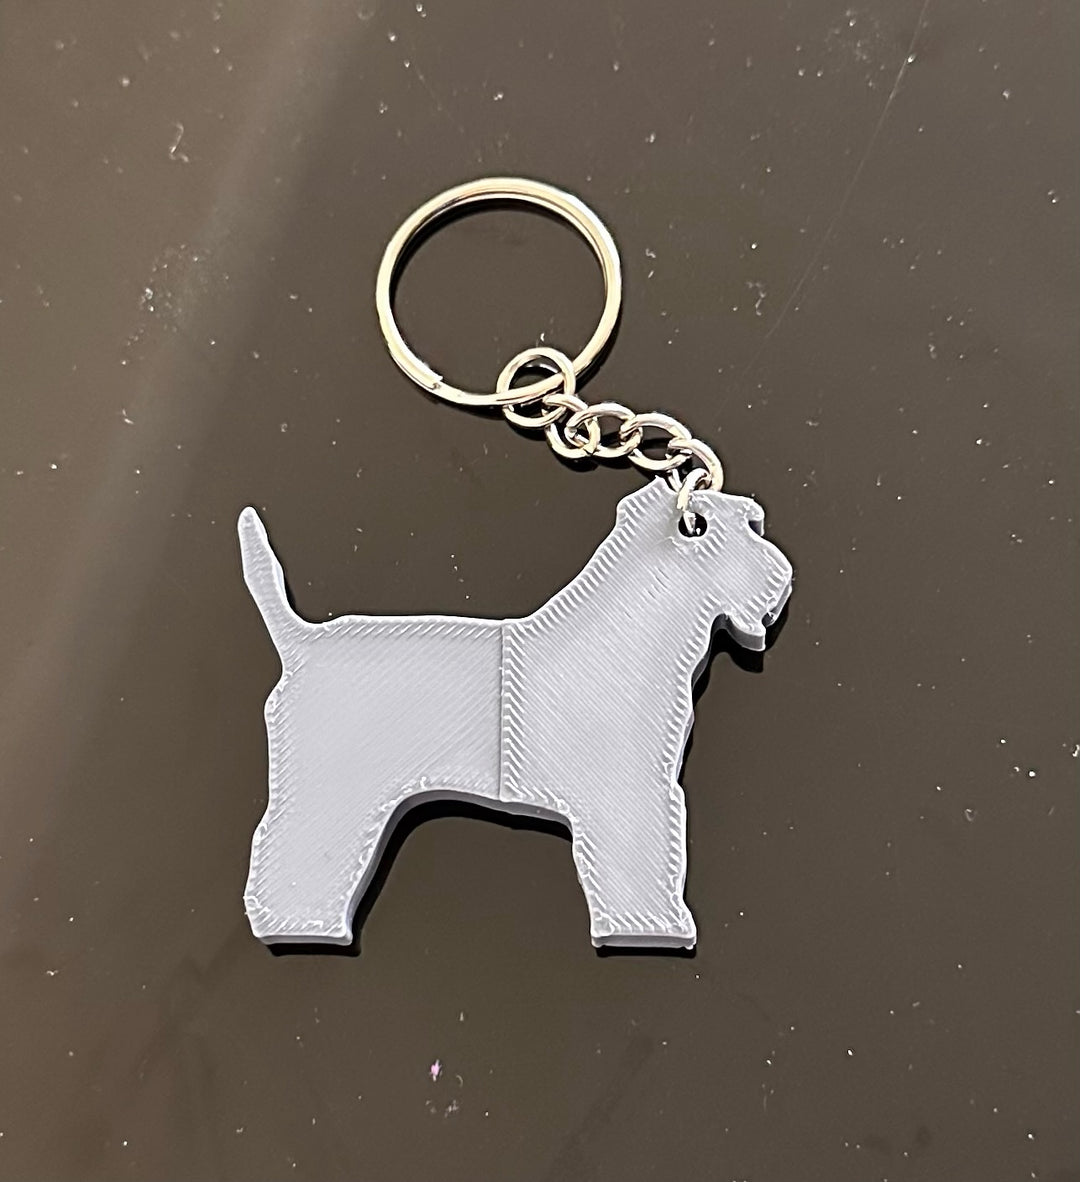 Wheaton Terrier Keyring Stl File | 3D Printed | Unique Personalised Gifts